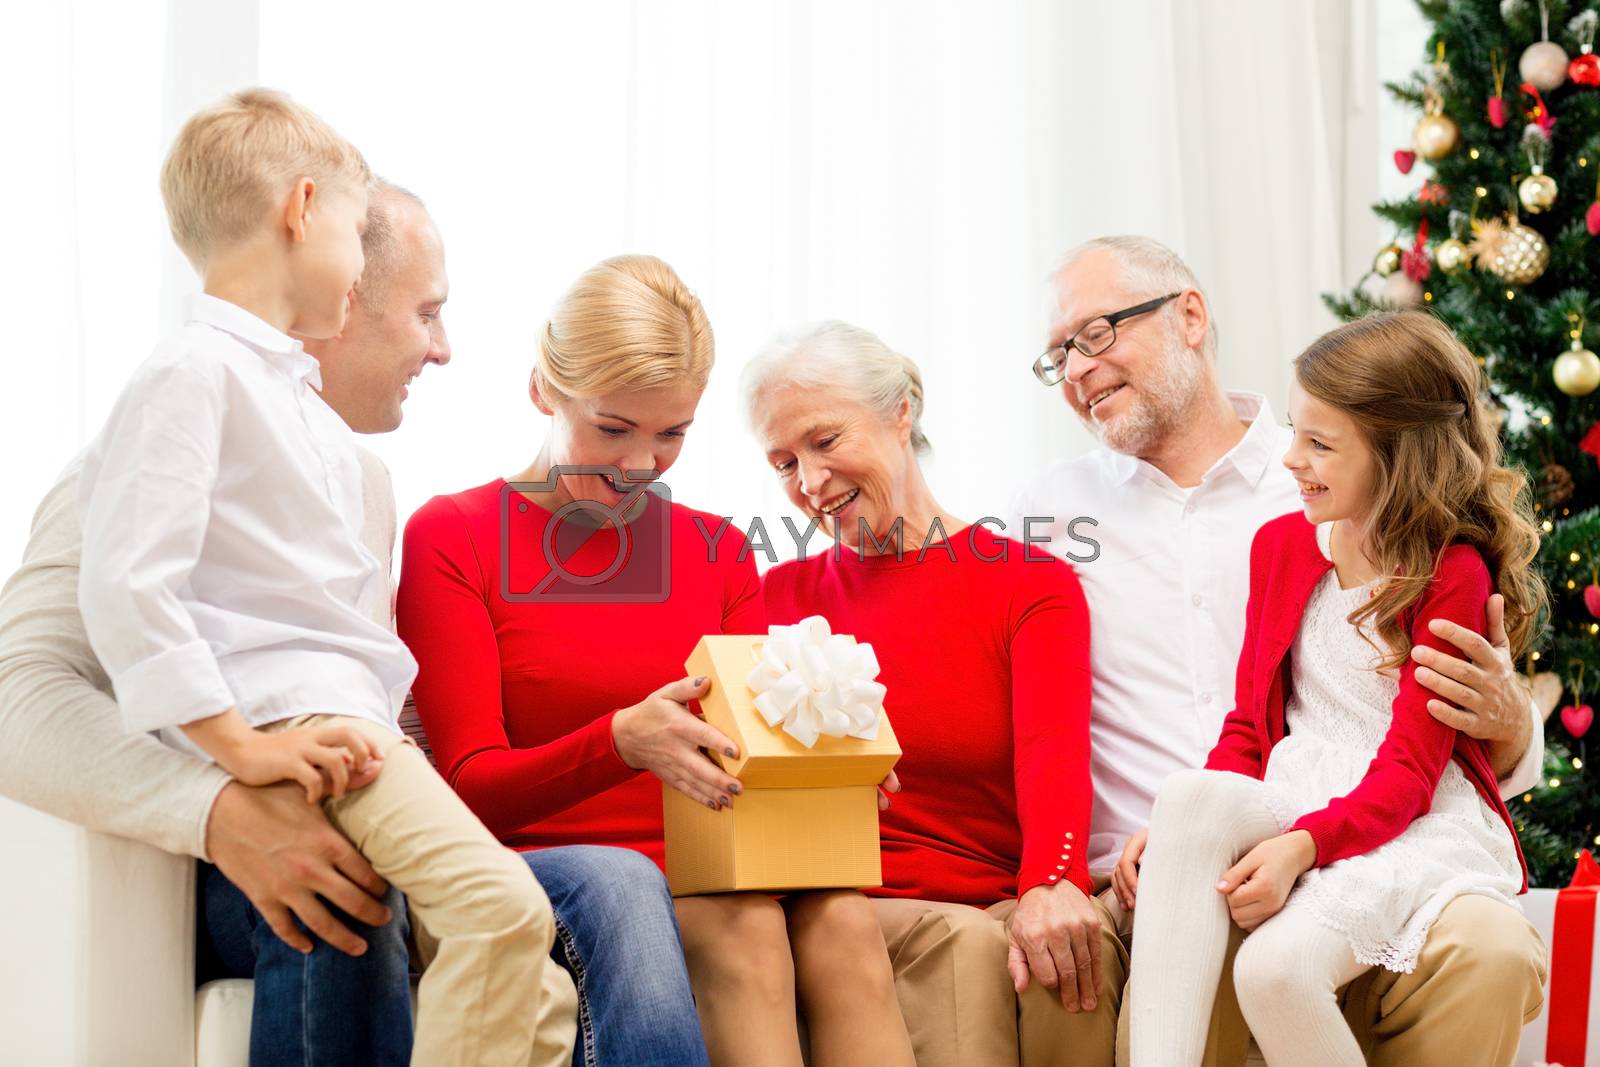 Royalty free image of smiling family with gifts at home by dolgachov